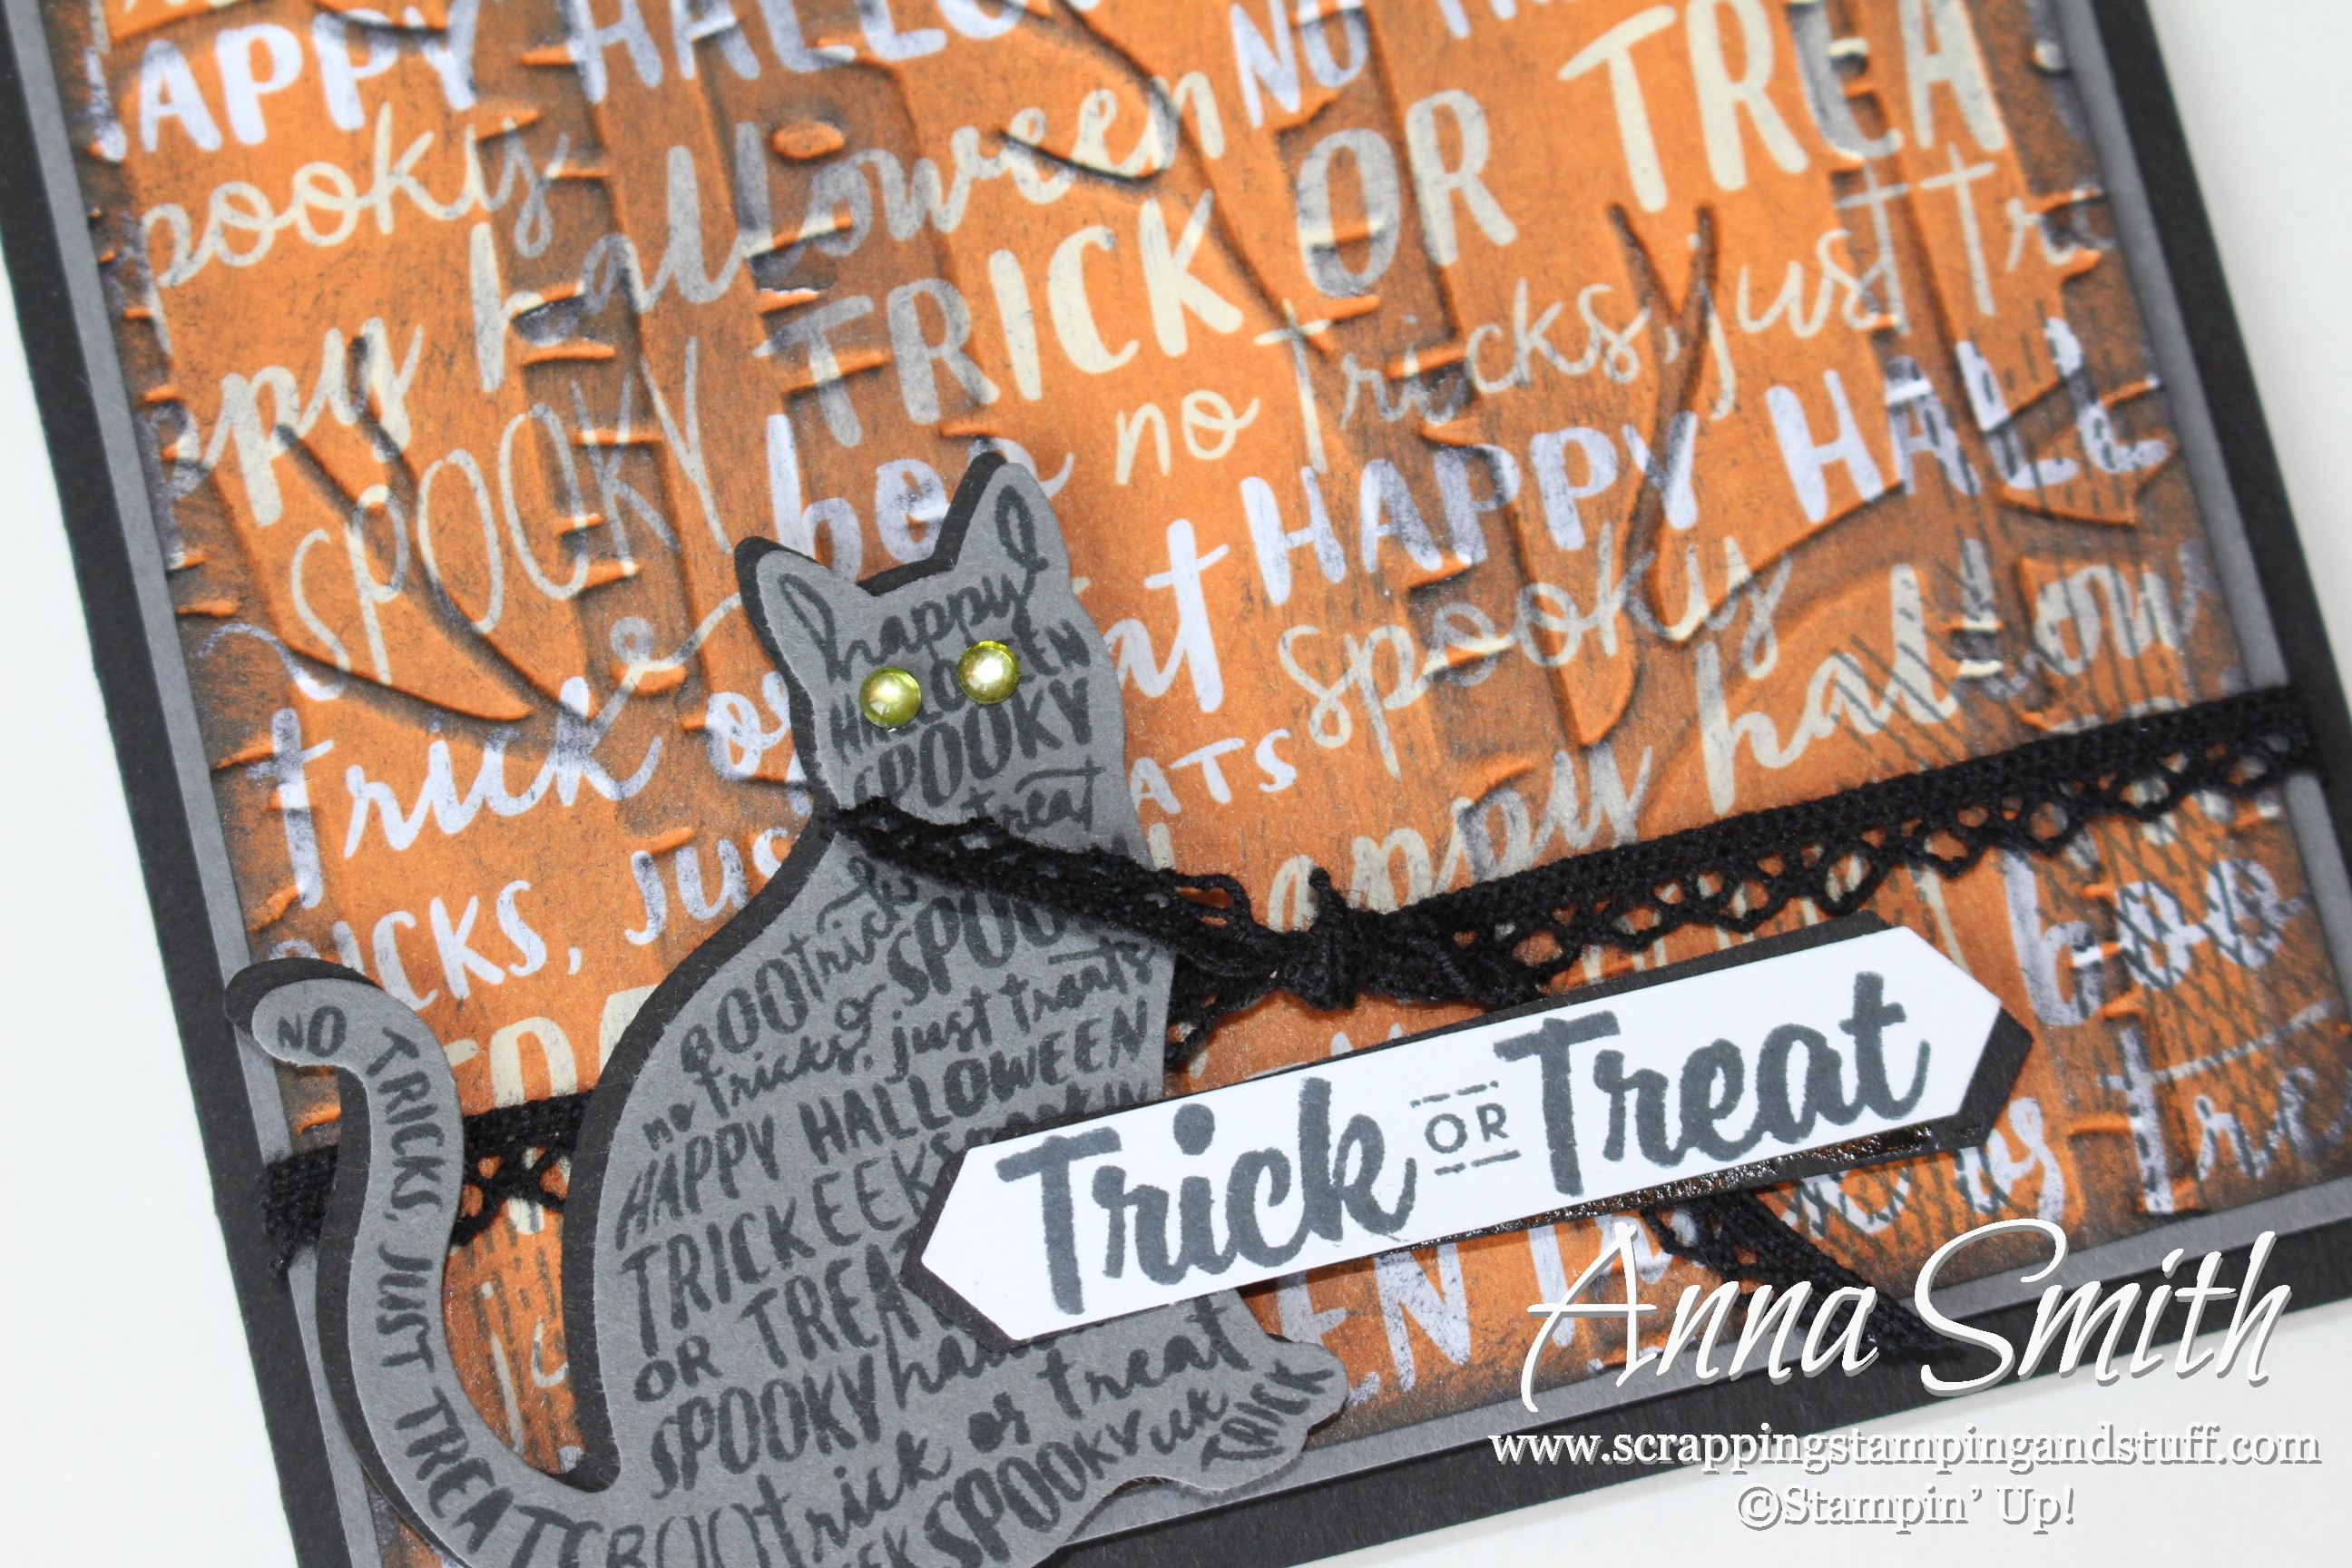 Stampin’ Up! Cat Punch Blog Hop Featuring the Stampin’ Up! Spooky Cat